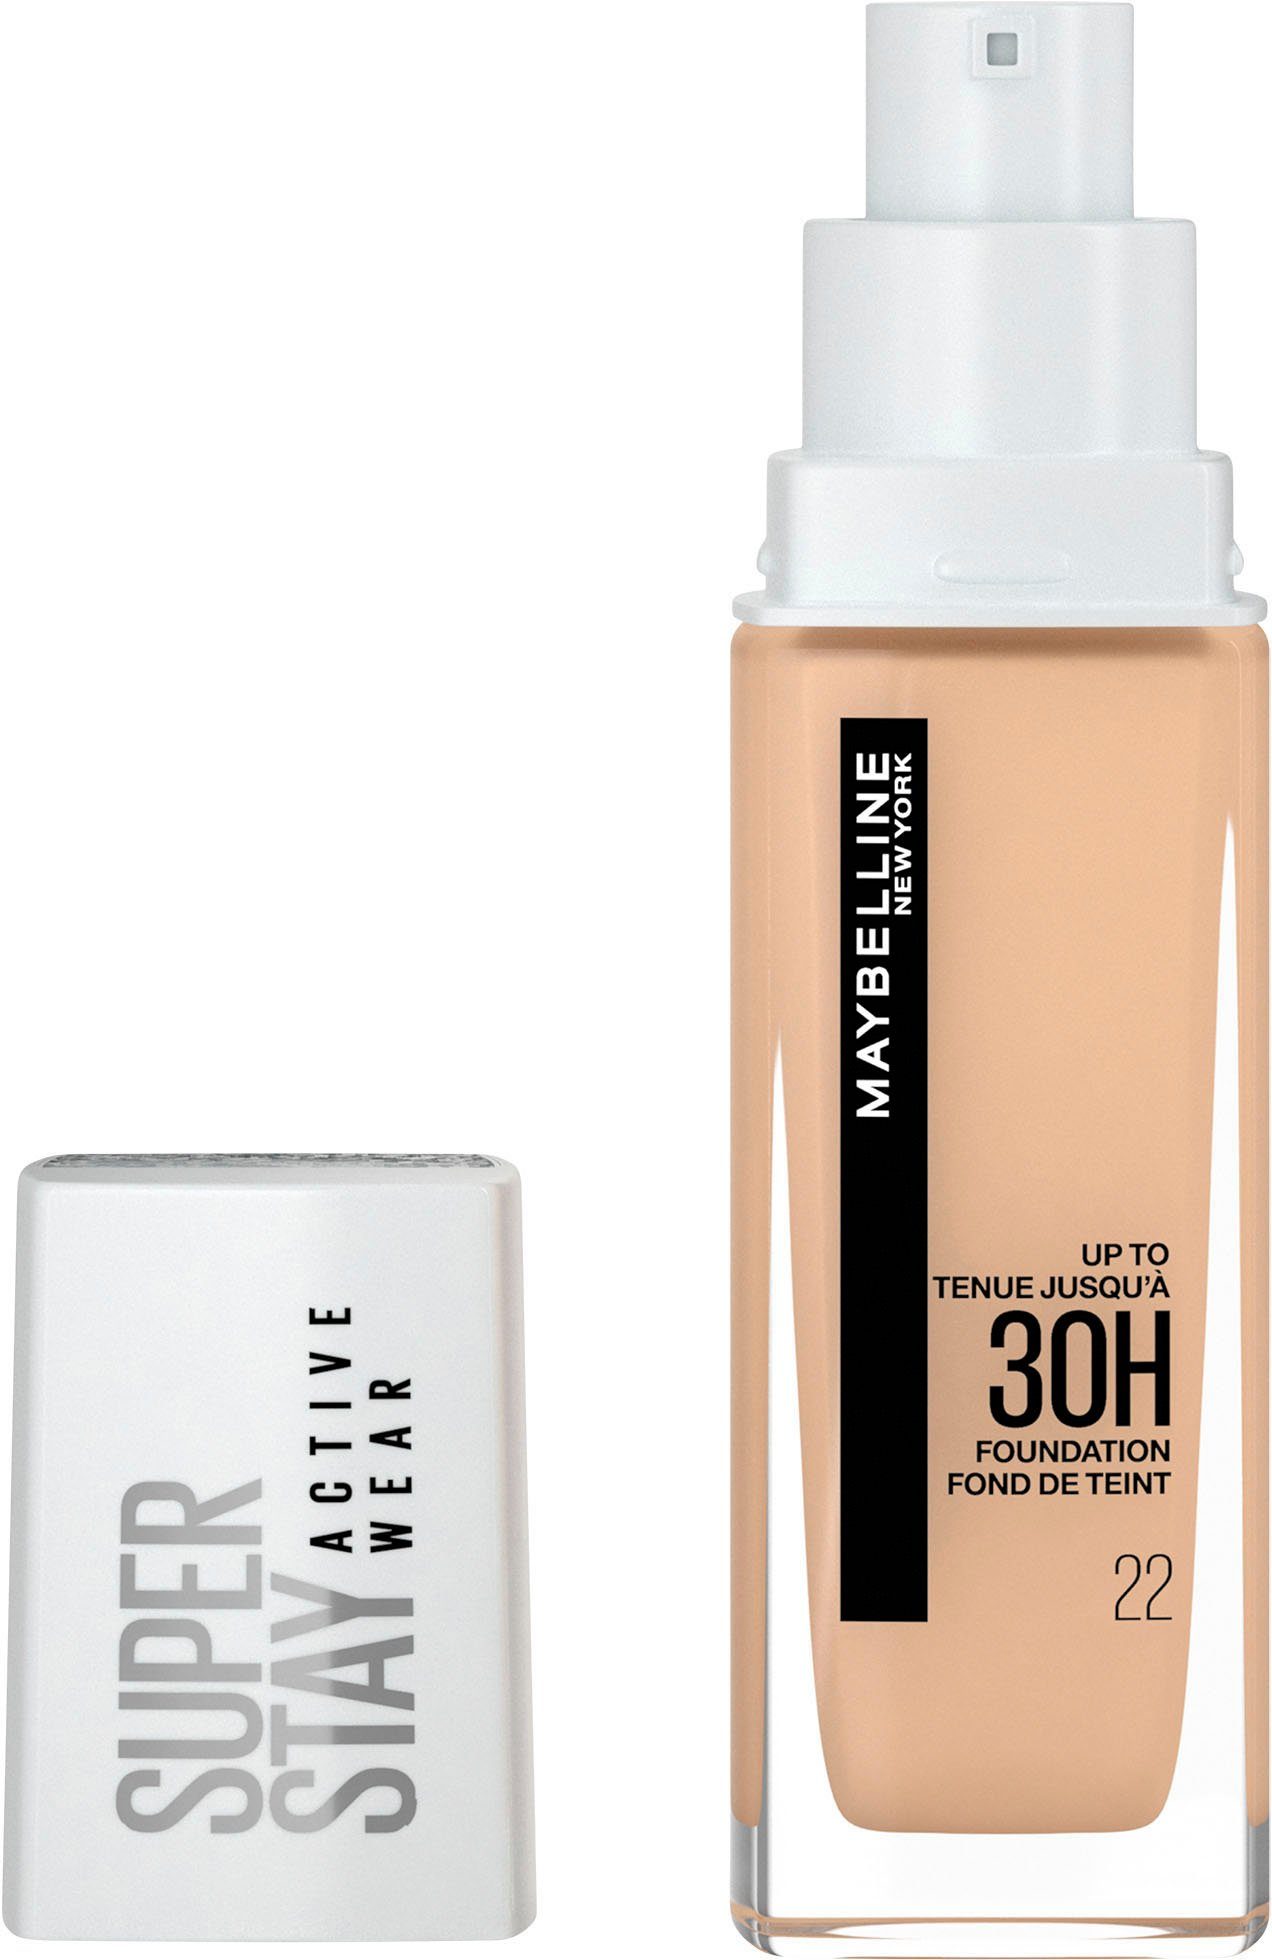 Active Bisque NEW Light MAYBELLINE 22 Foundation Super Wear YORK Stay